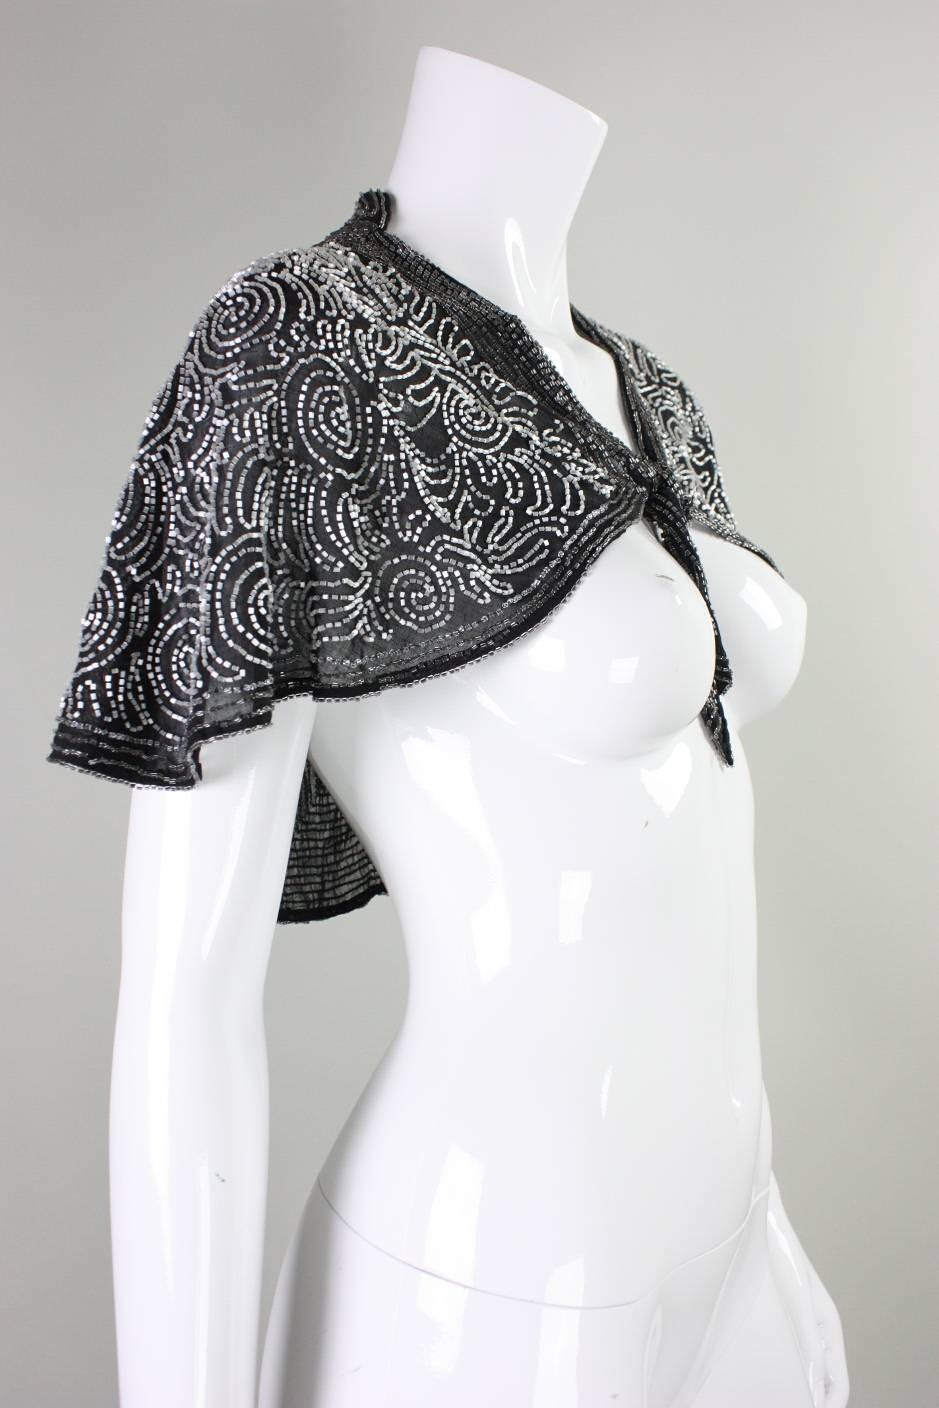 Vintage capelet dates to the 1930's and is made of lightweight black cotton that is covered in an allover pattern with glass bugle beads.  Tag at center back neckline reads 